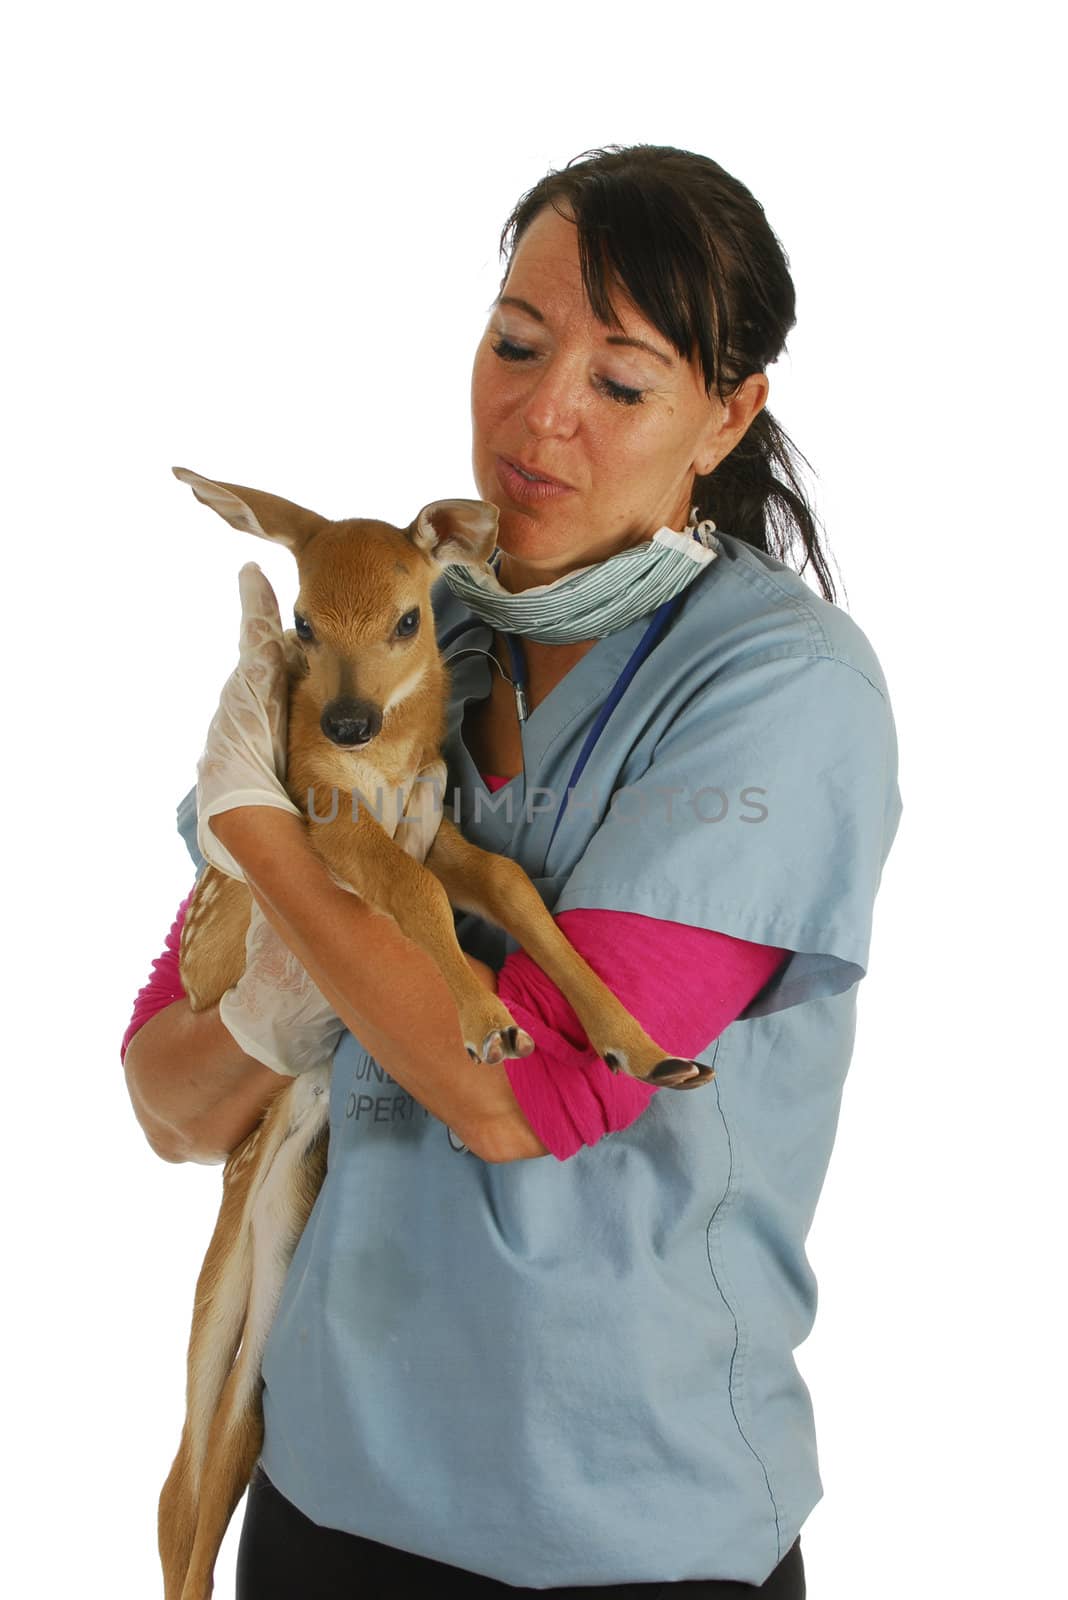 wildlife veterinary care - veterinarian caring for orphaned fawn isolated on white background